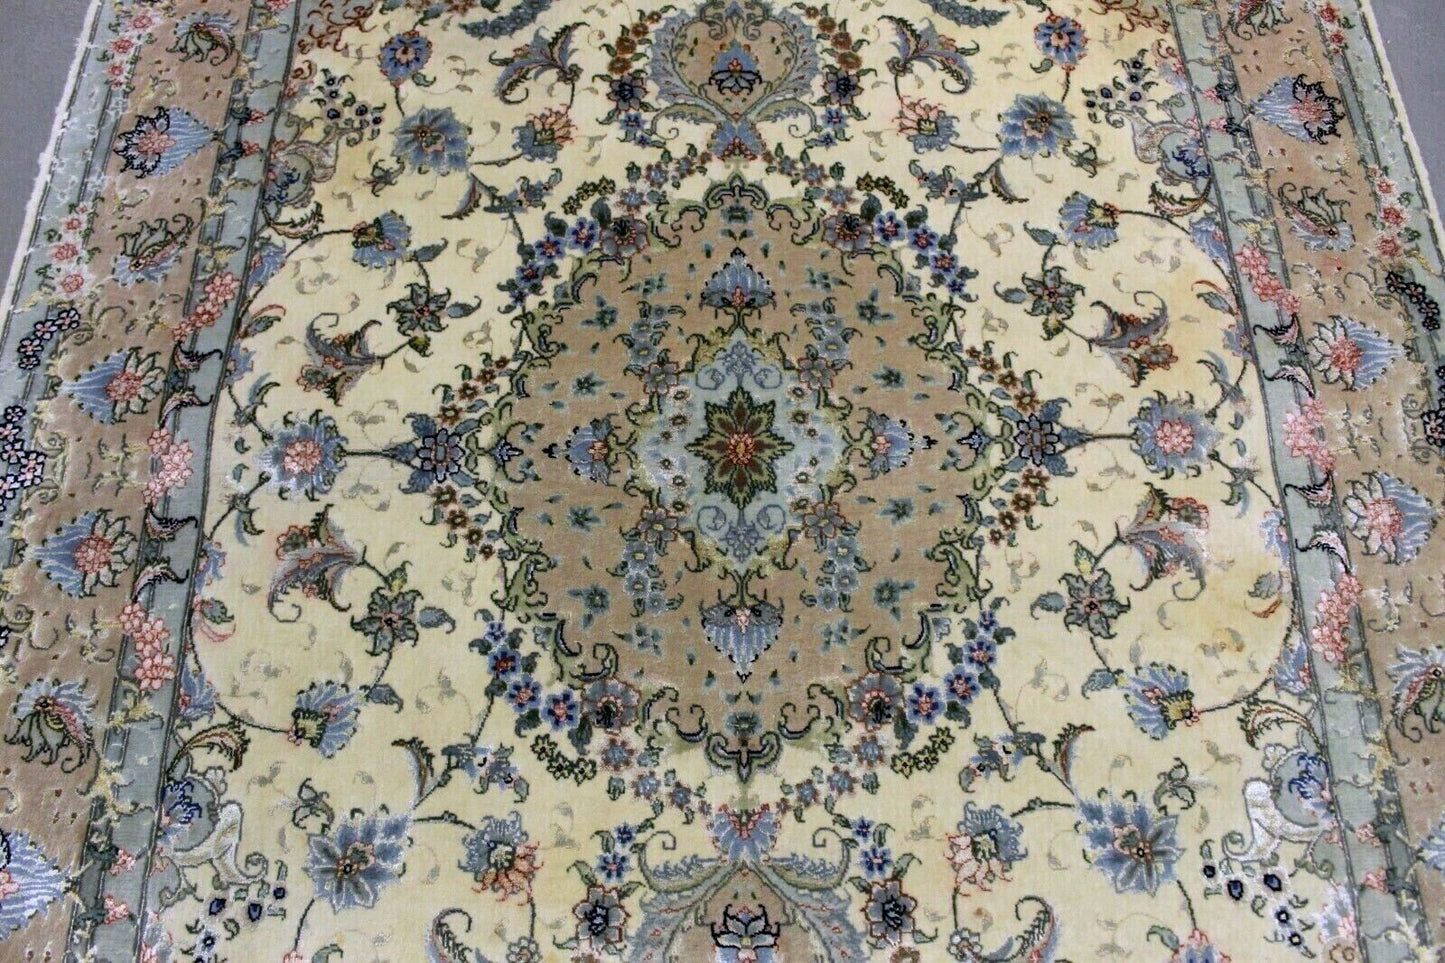 Plush Woolen Pile with Delicate Silk Highlights Creating Opulent Texture on Handcrafted Tabriz Rug - 1970s